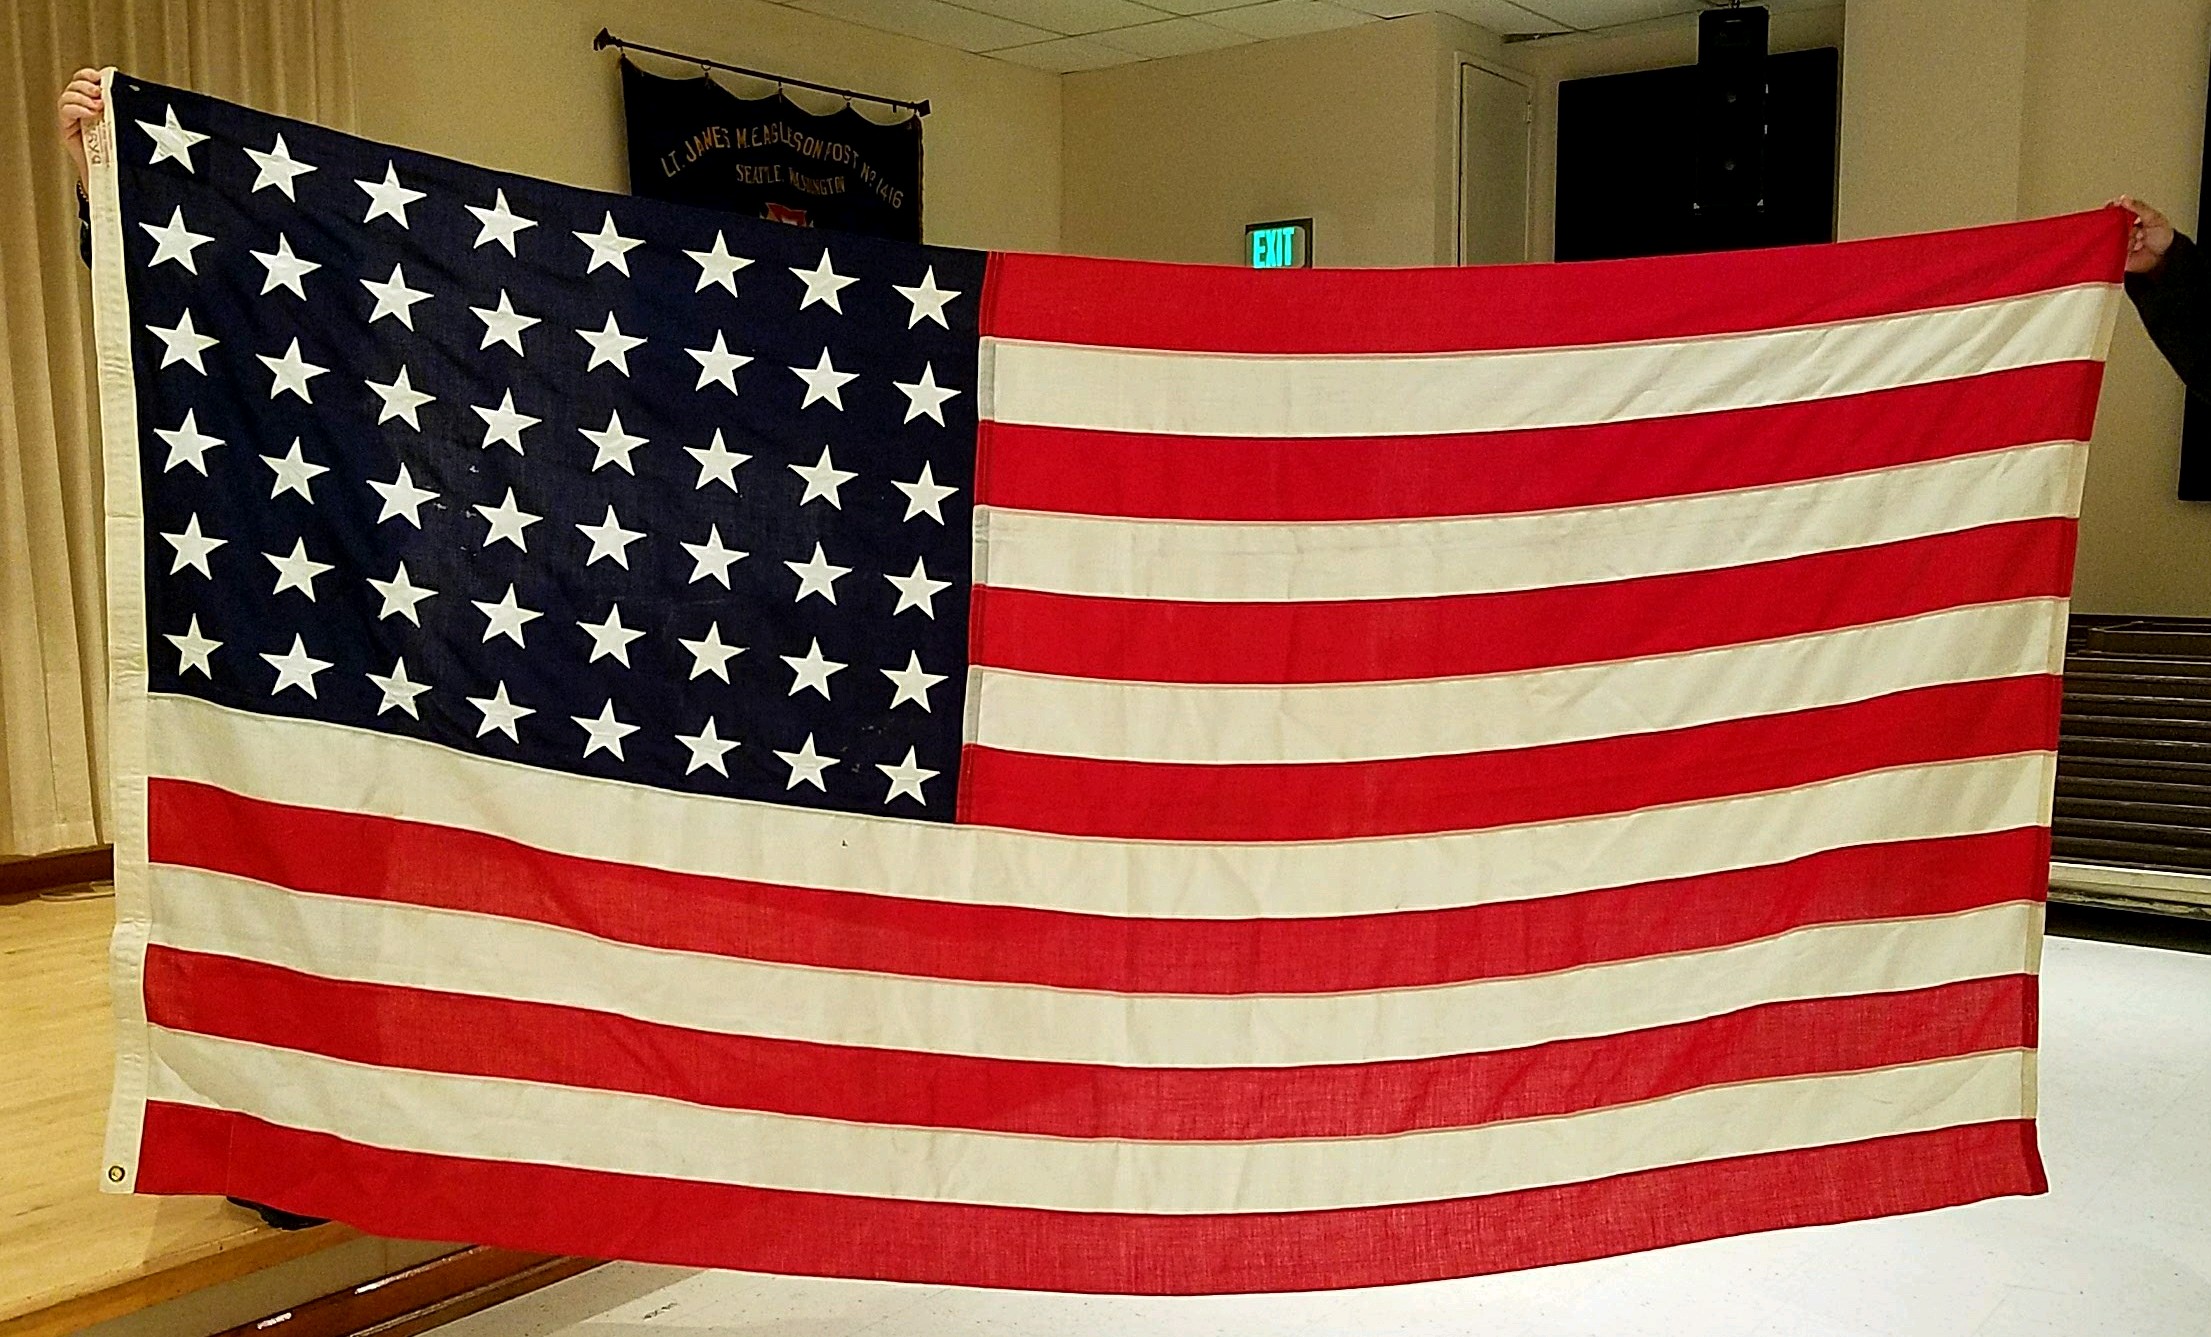 48-star-flag-available-ballard-eagleson-veterans-of-foreign-wars-post